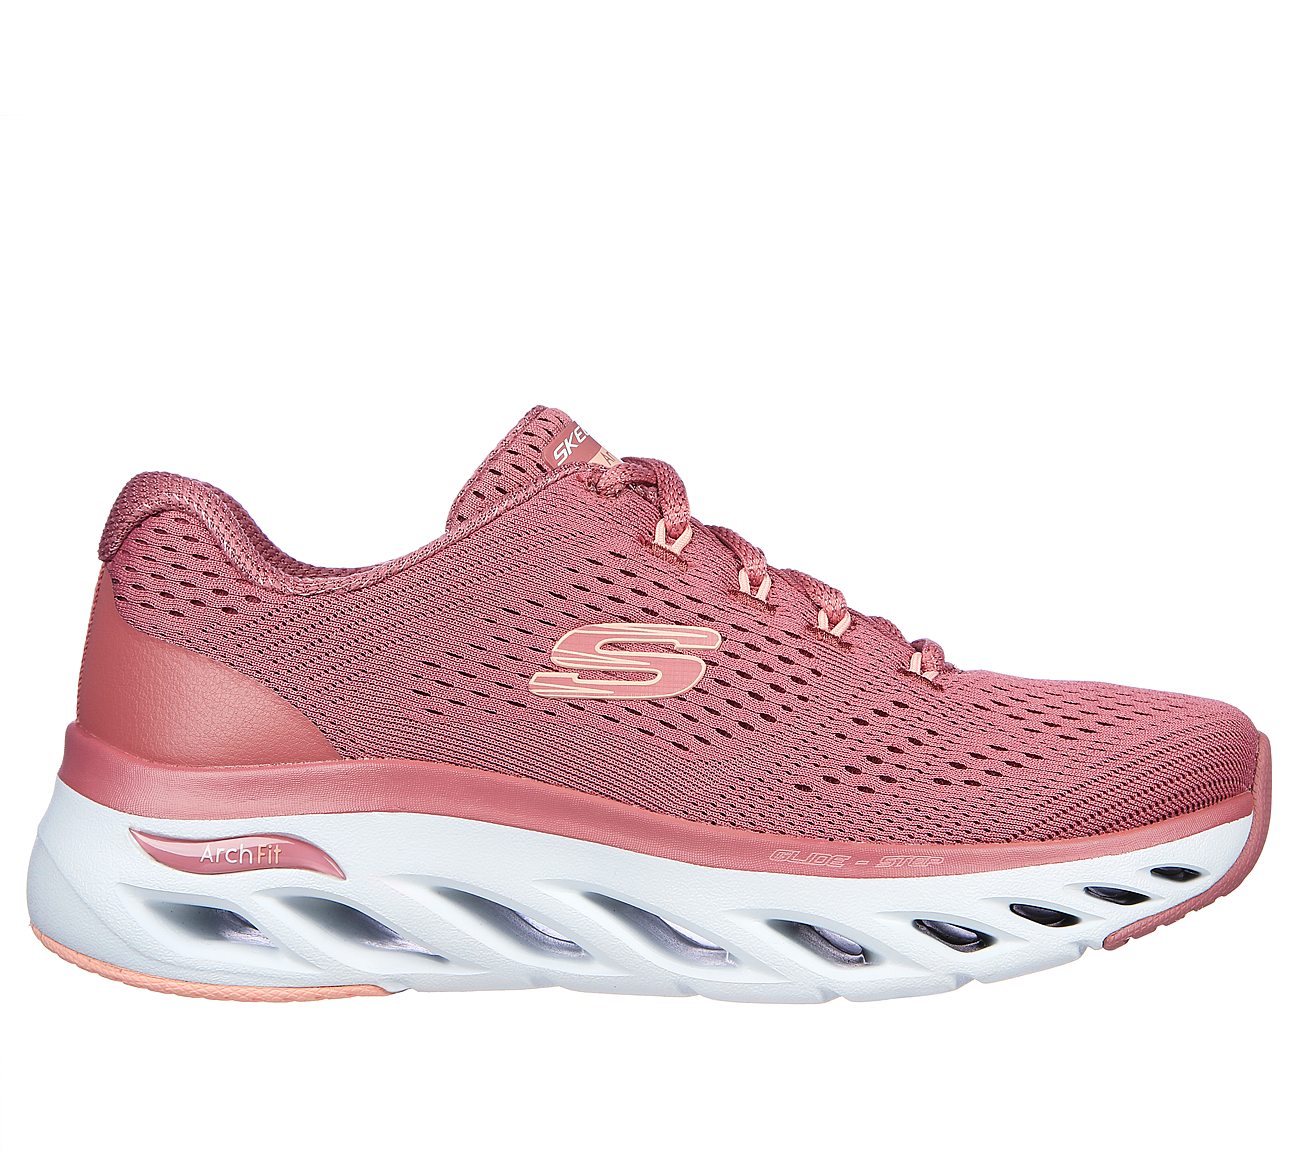 Skechers ARCH FIT GLIDE-STEP-TOP GLORY